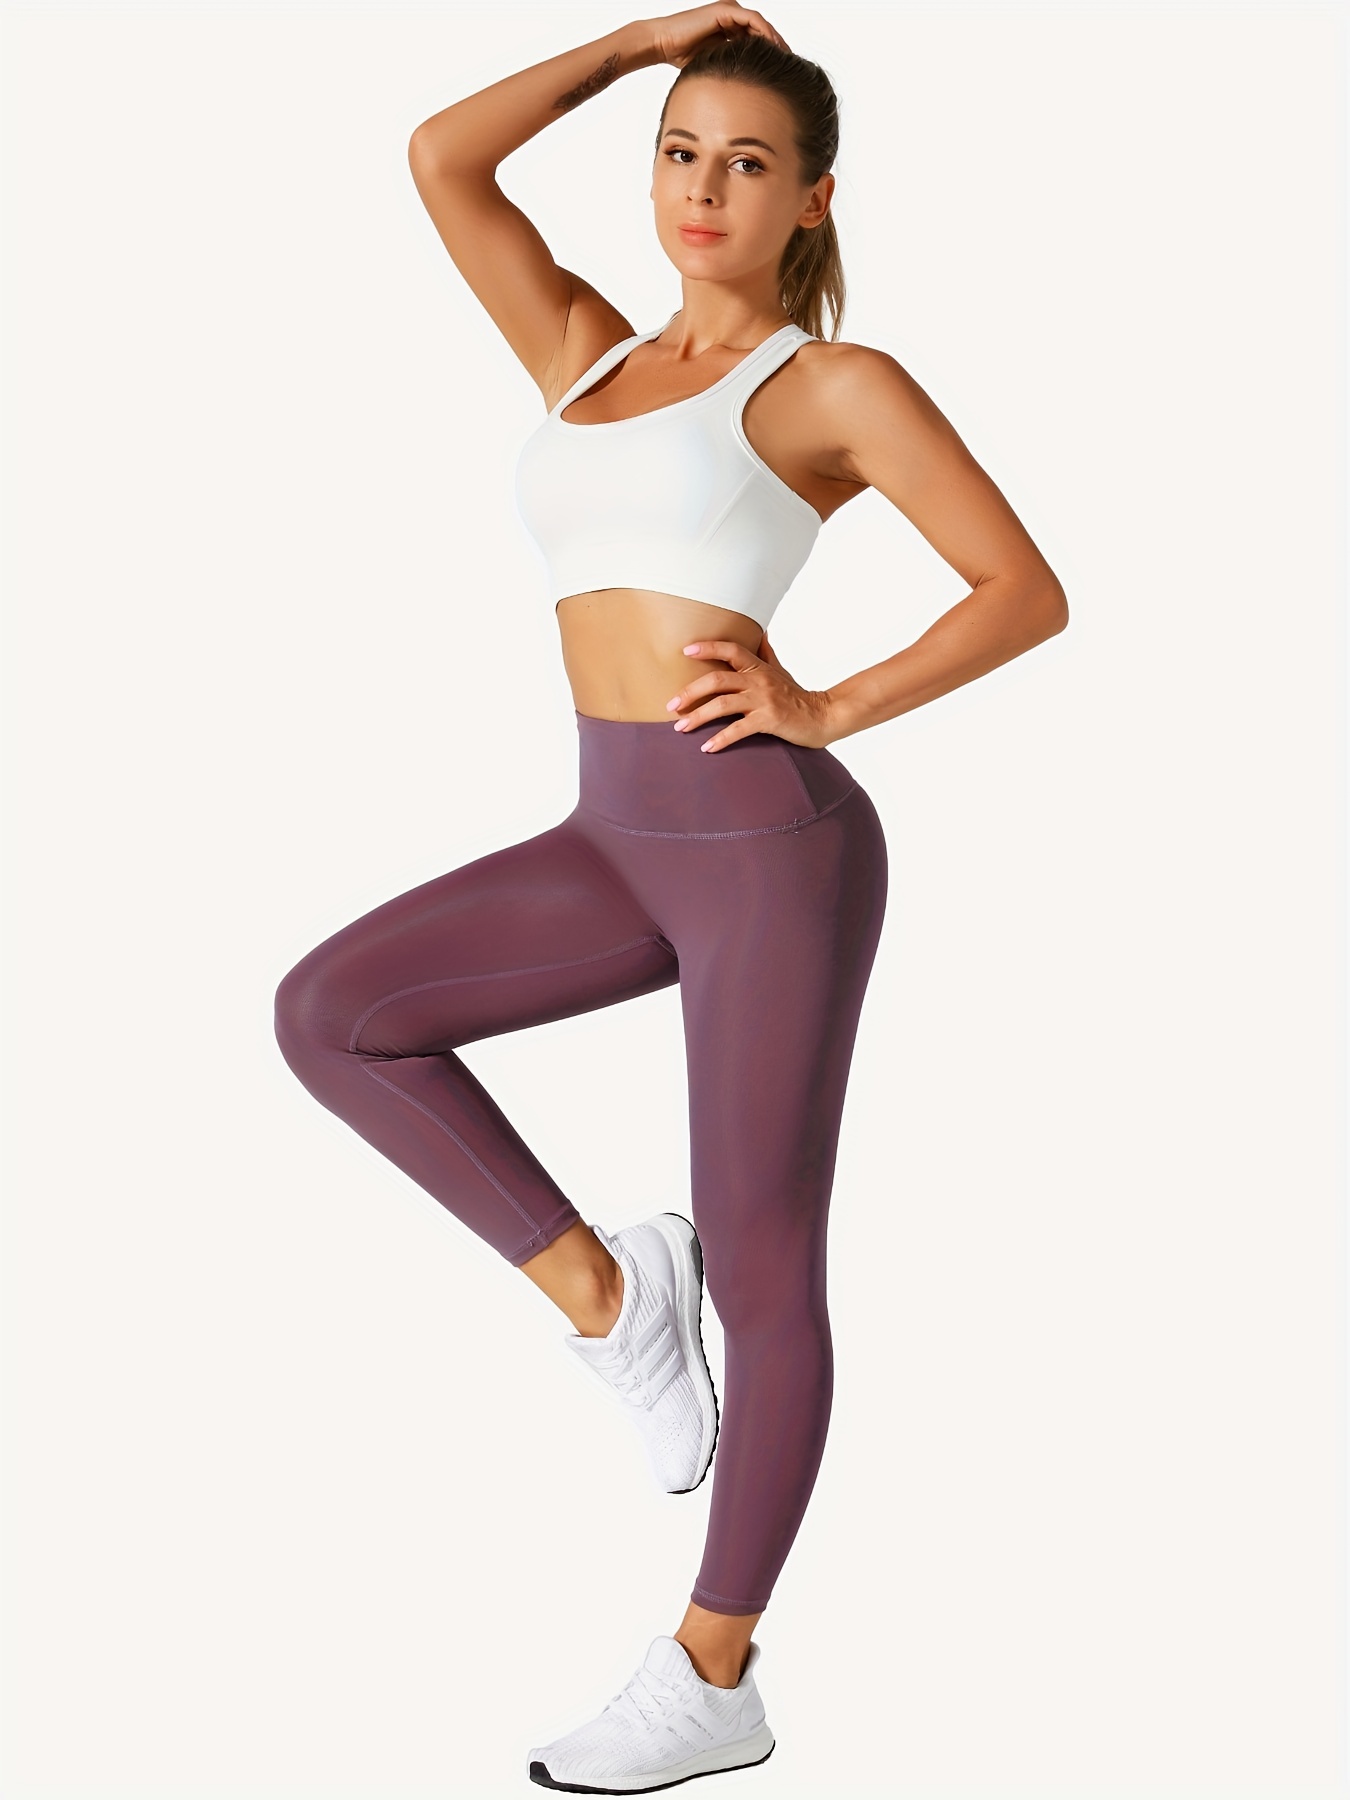 Womens High Waist Lace Detail Yoga Leggings Stretchy Fitness Pencil Pants  For Sportswear From Xiadou_trading, $9.64